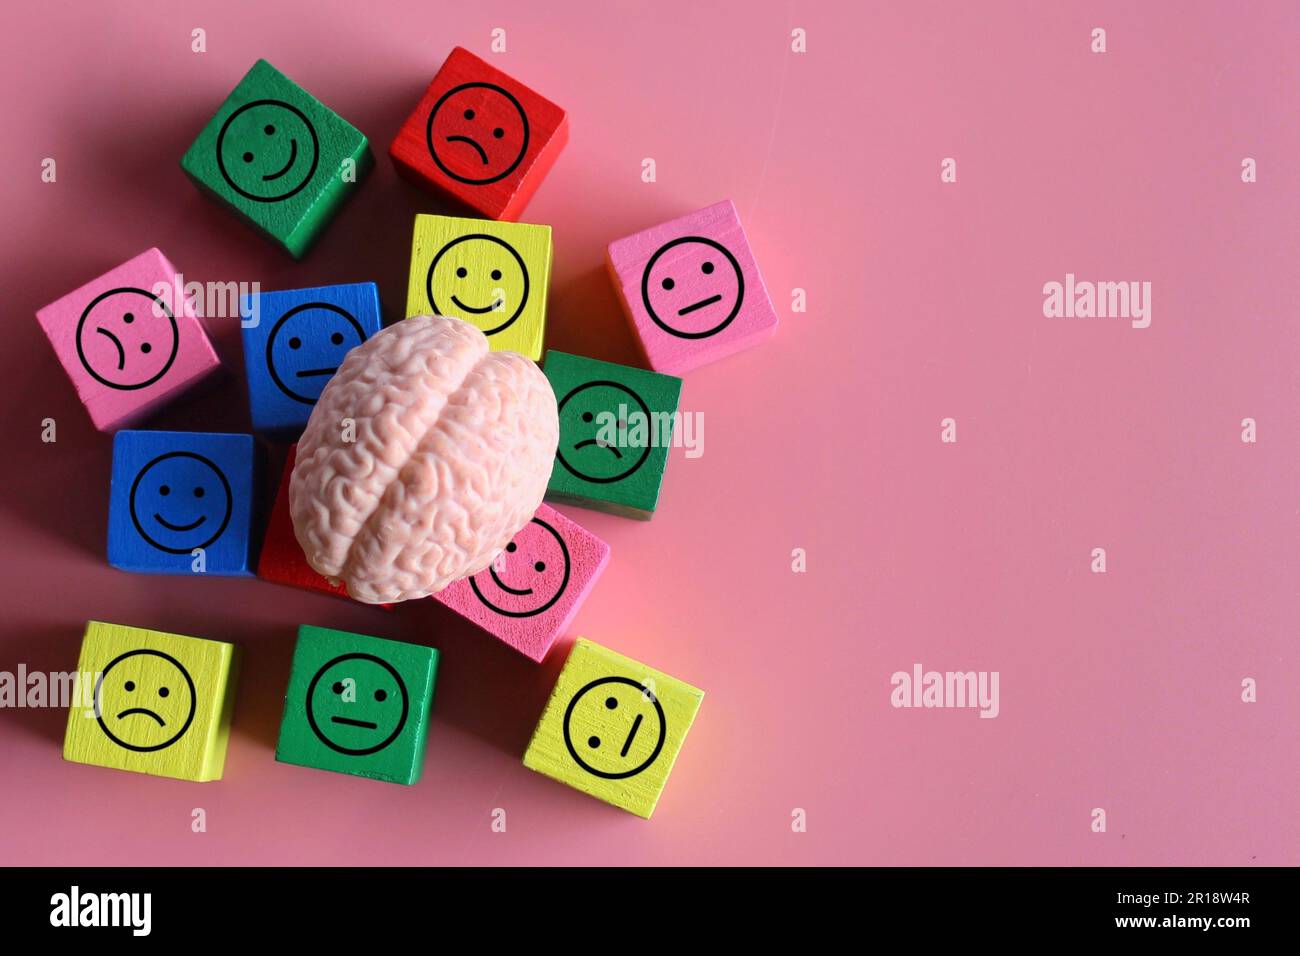 Human brain with happy, neutral and sad icon. Mental health, mood swings, bipolar disorder concept. Stock Photo